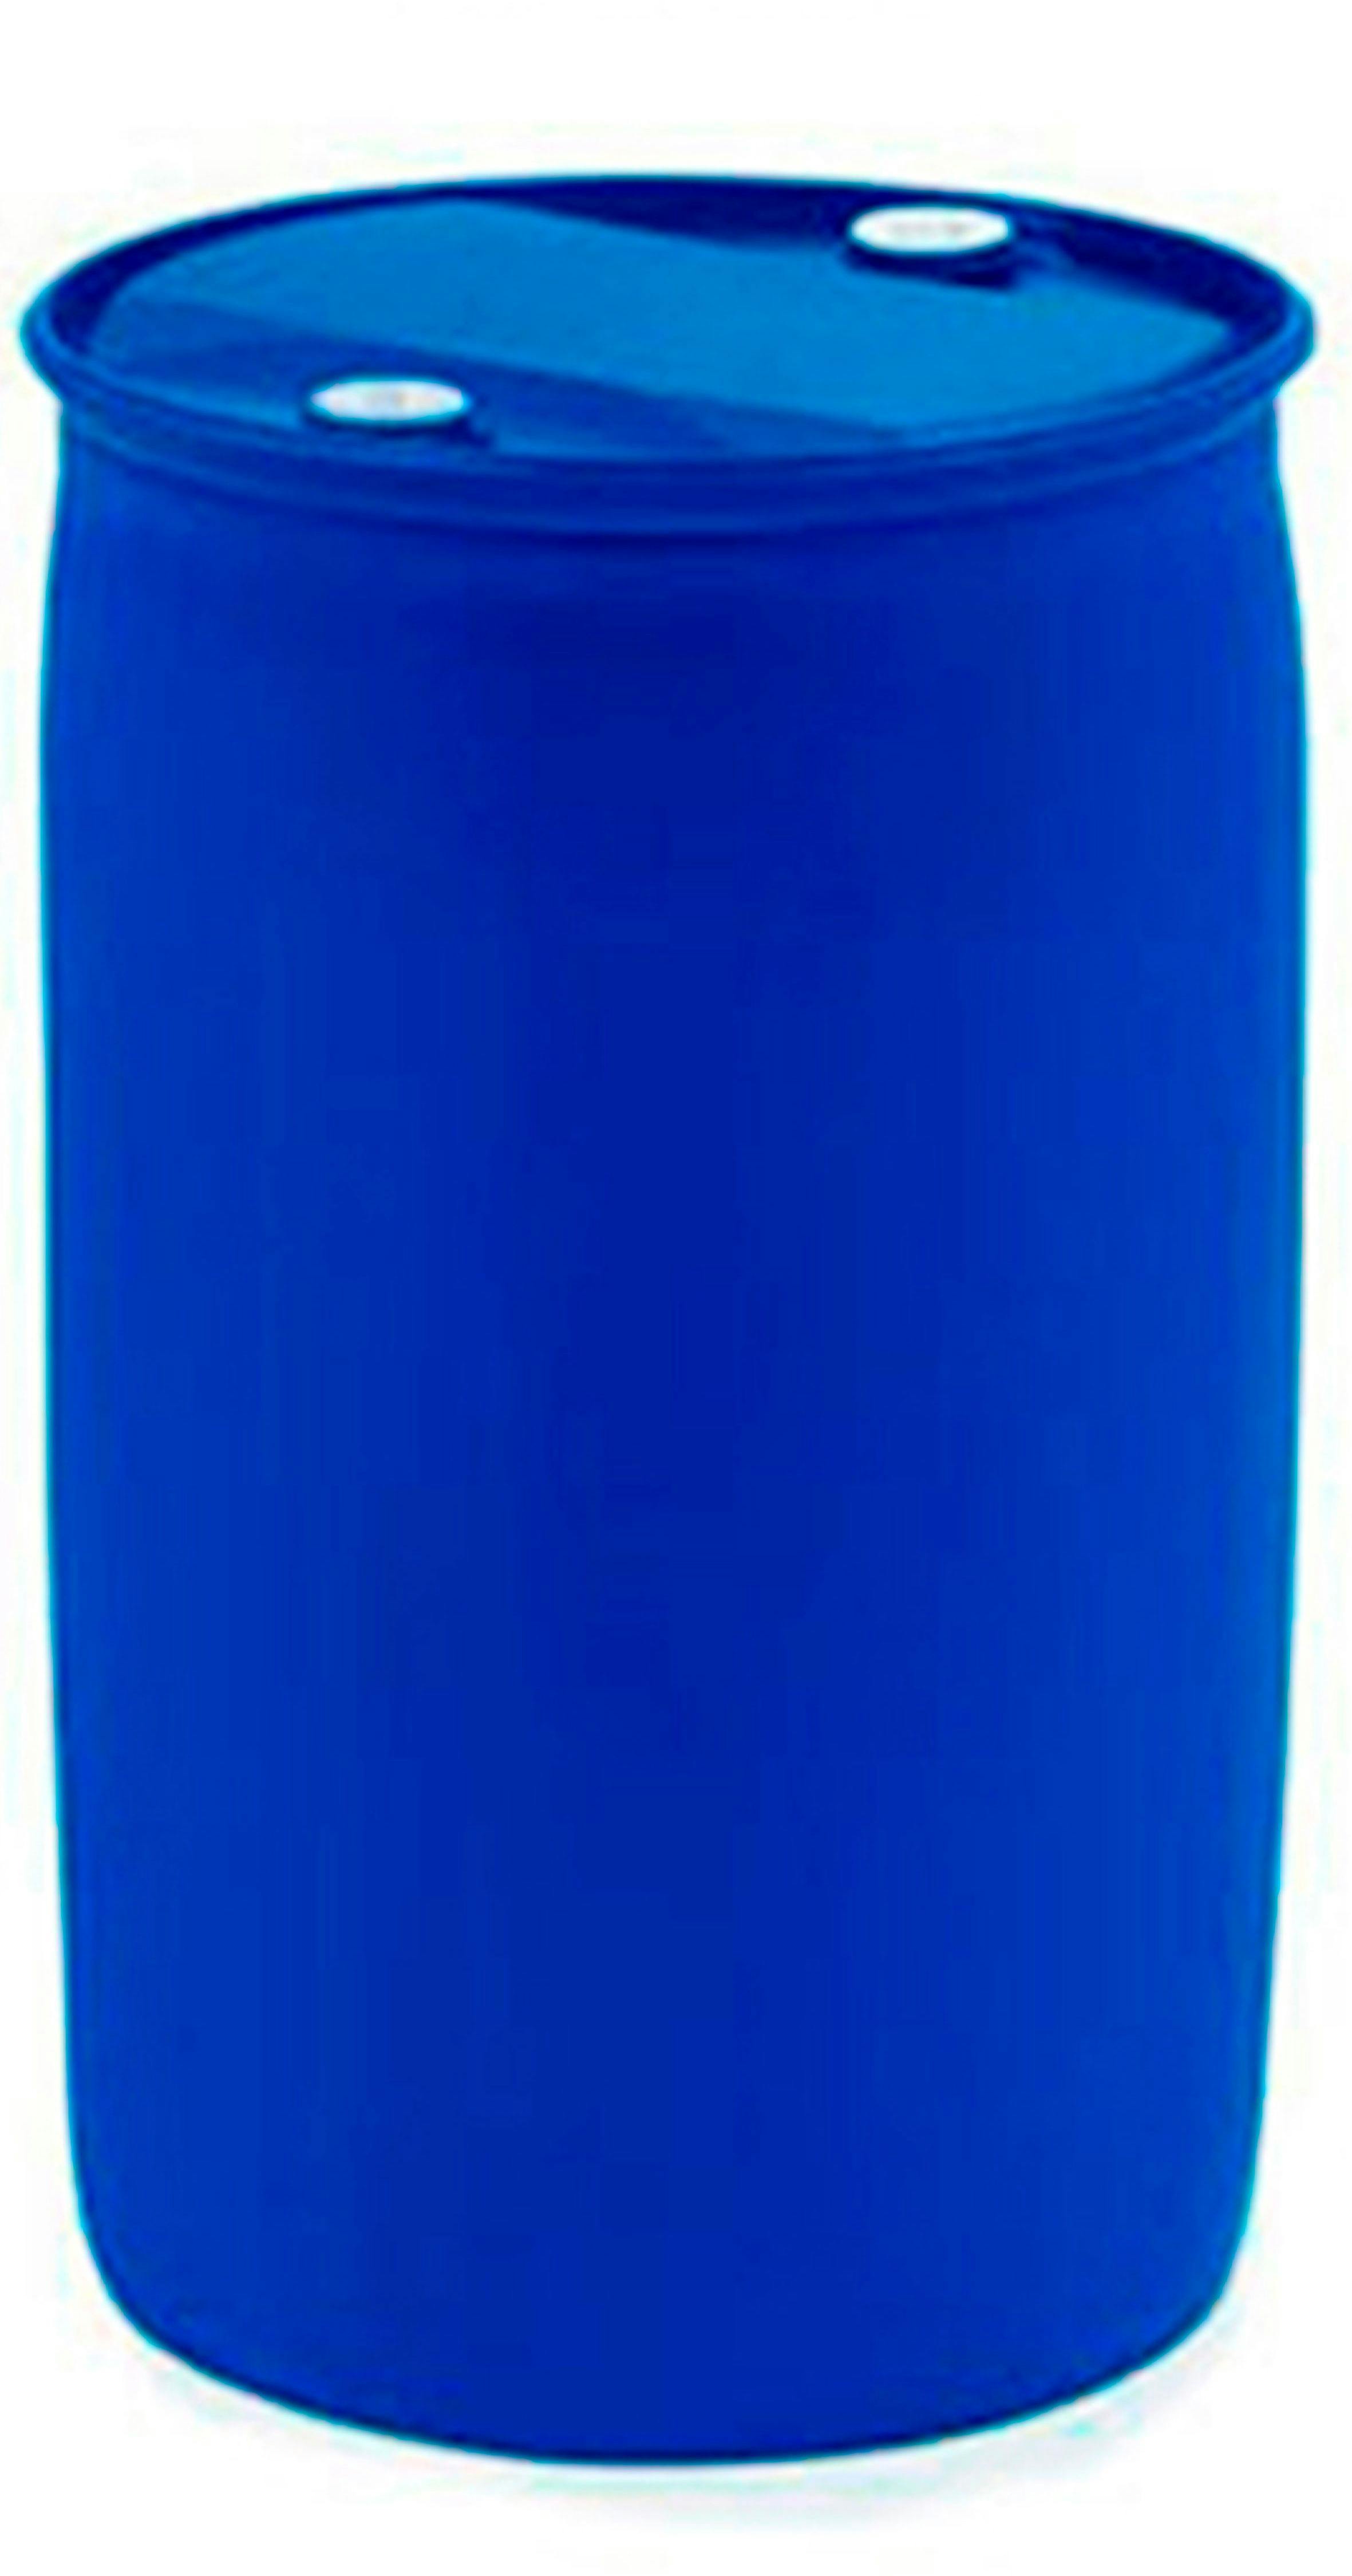 Canister HDPE 220 liters blue homologated Ring D2